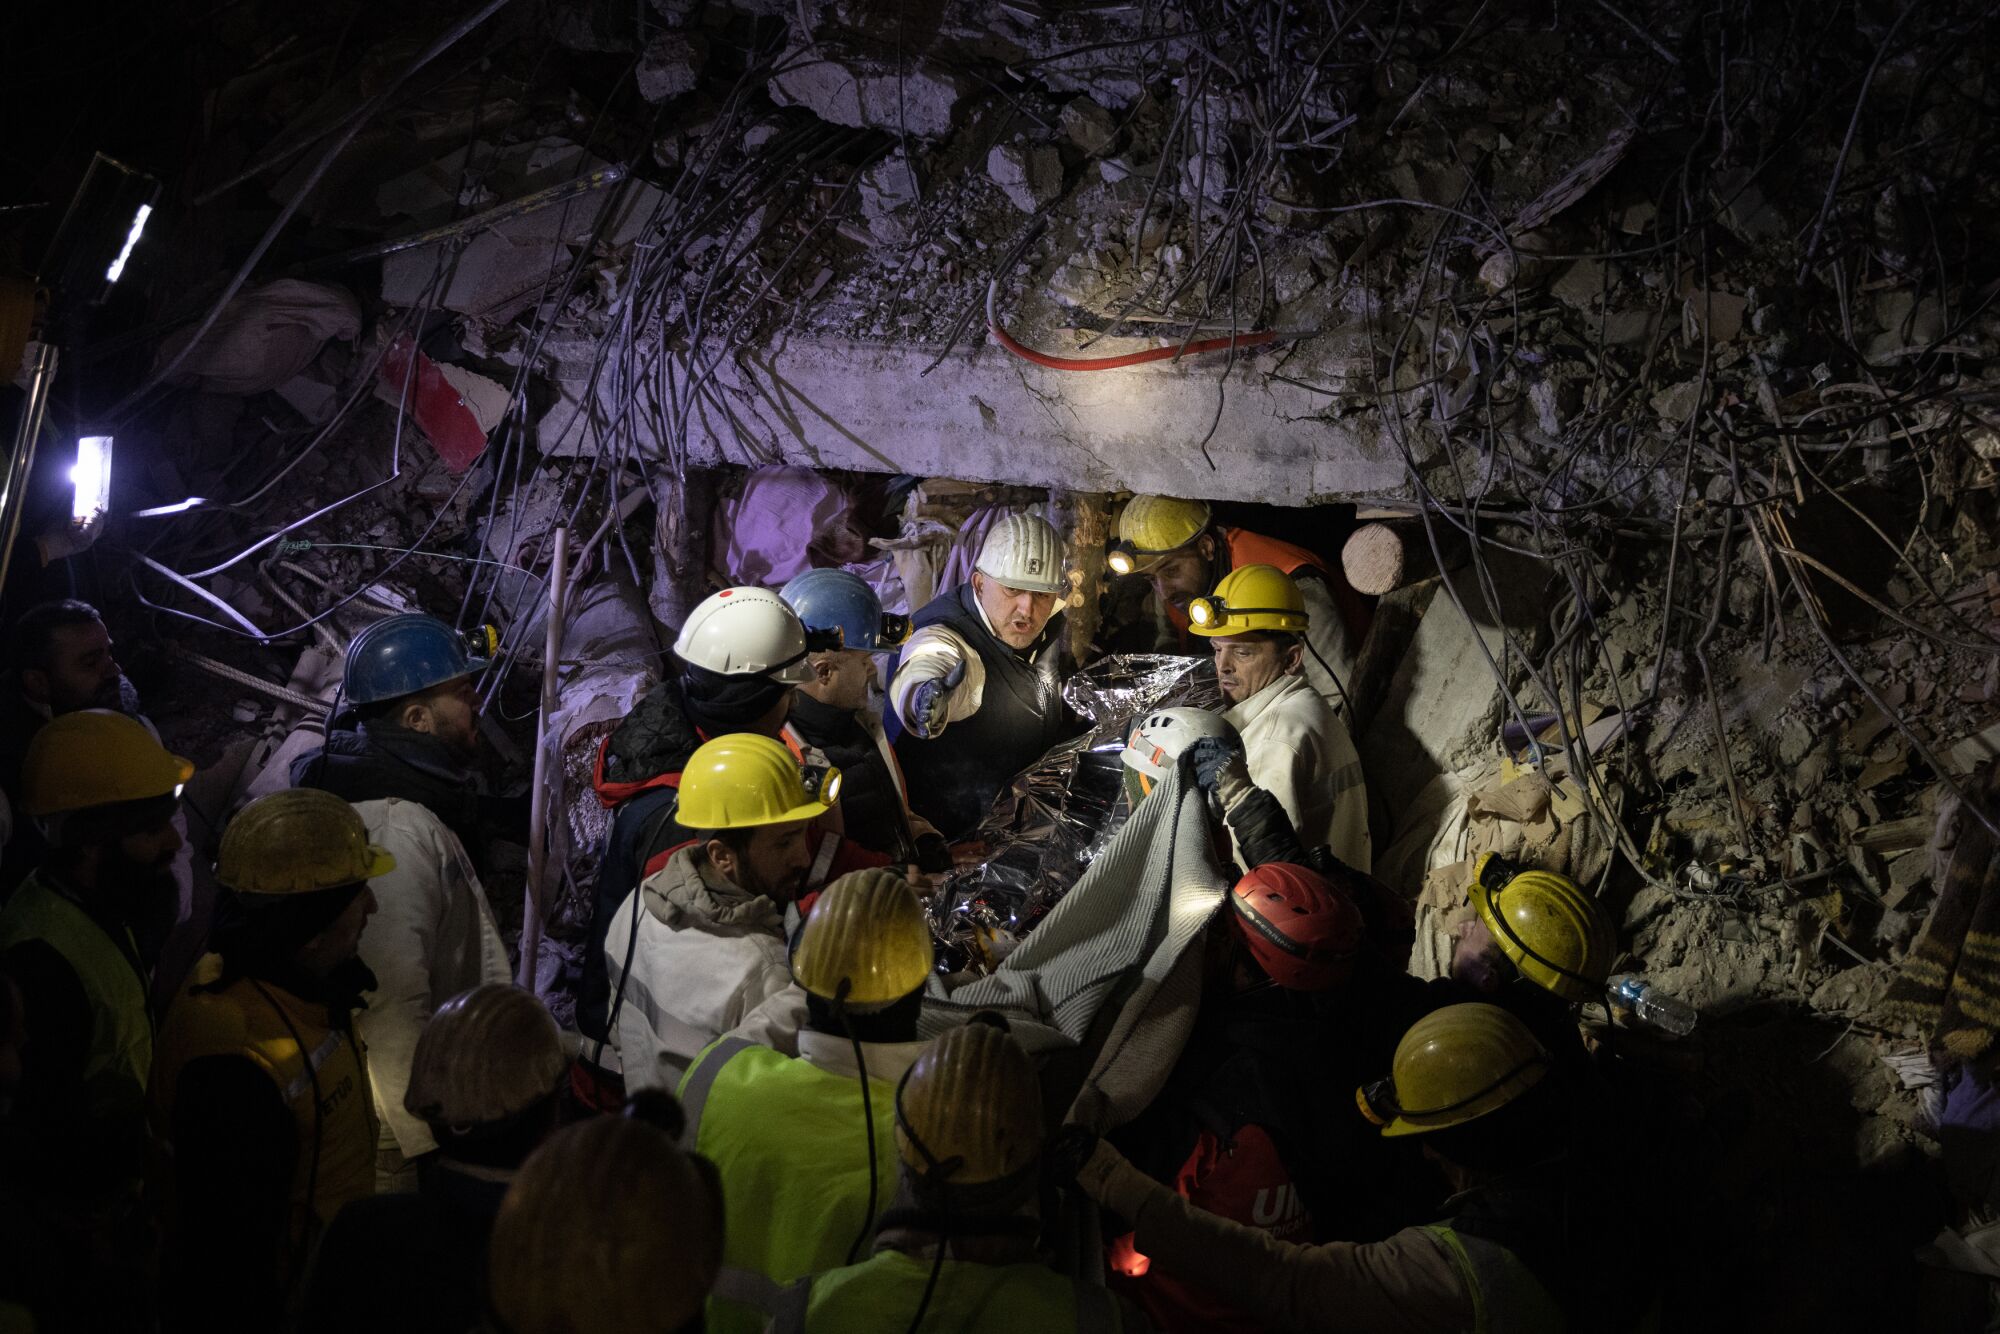 Several people in hard hats help carry out a person on a stretch from rubble at night